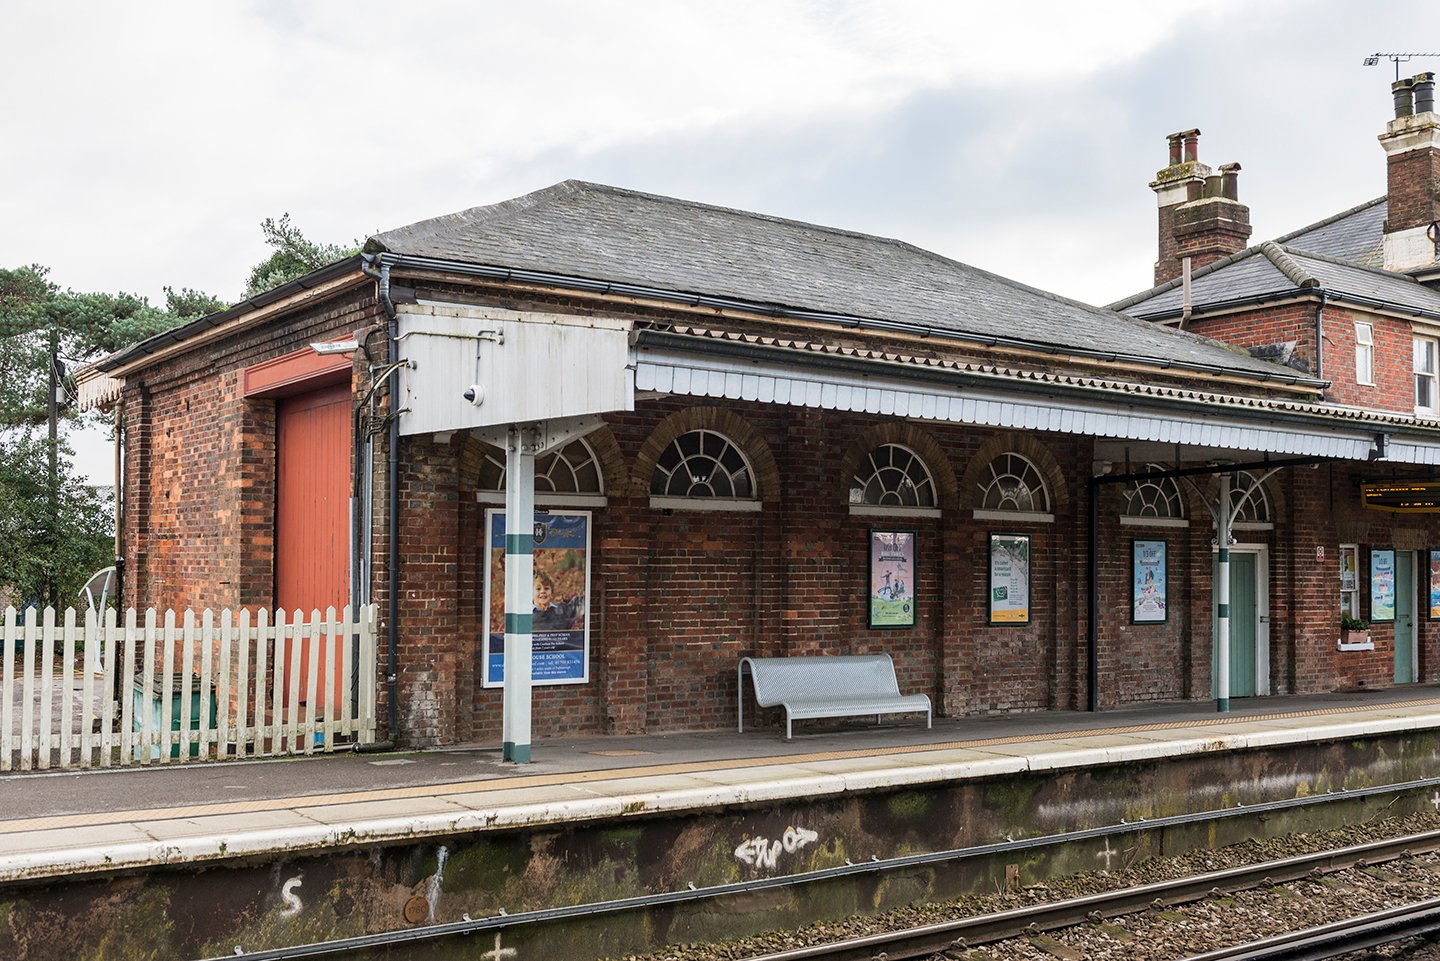 A goods shed, integrated with a passenger station, Pulborough, dating from 1859 featuring and awning on the platform side and lunettes.